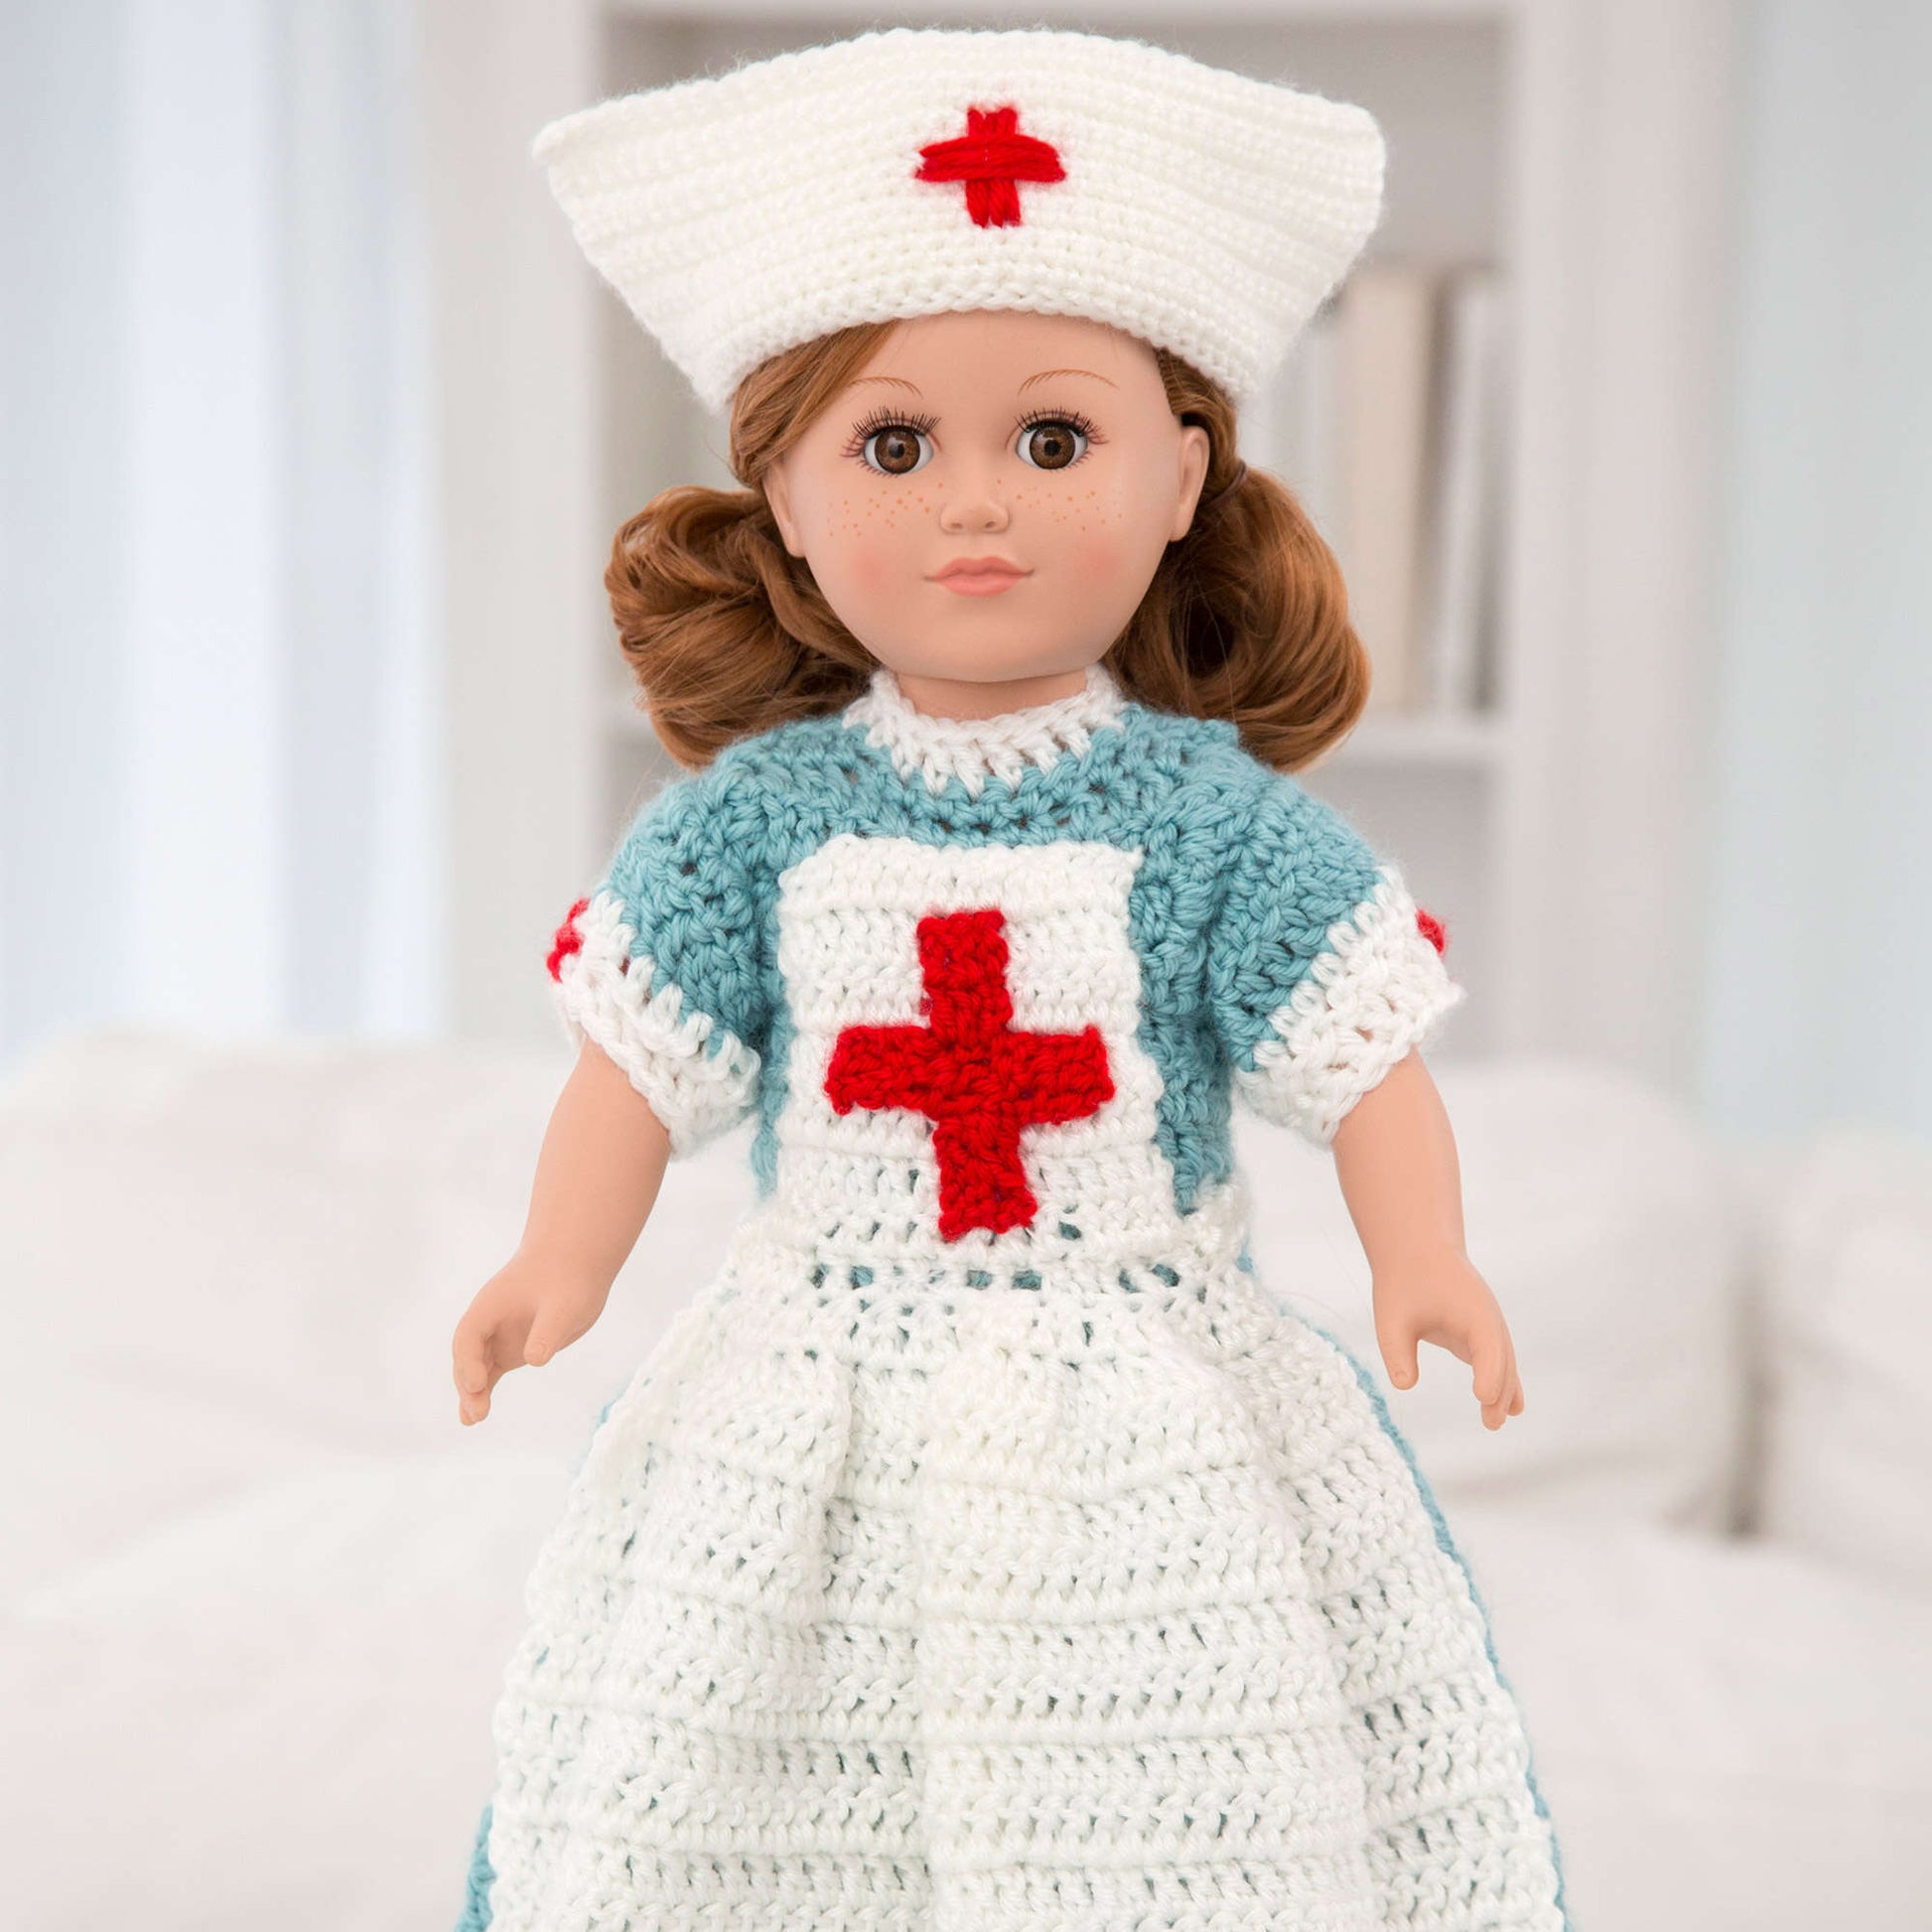 Free Red Heart Caring Nurse Doll To Crochet Pattern